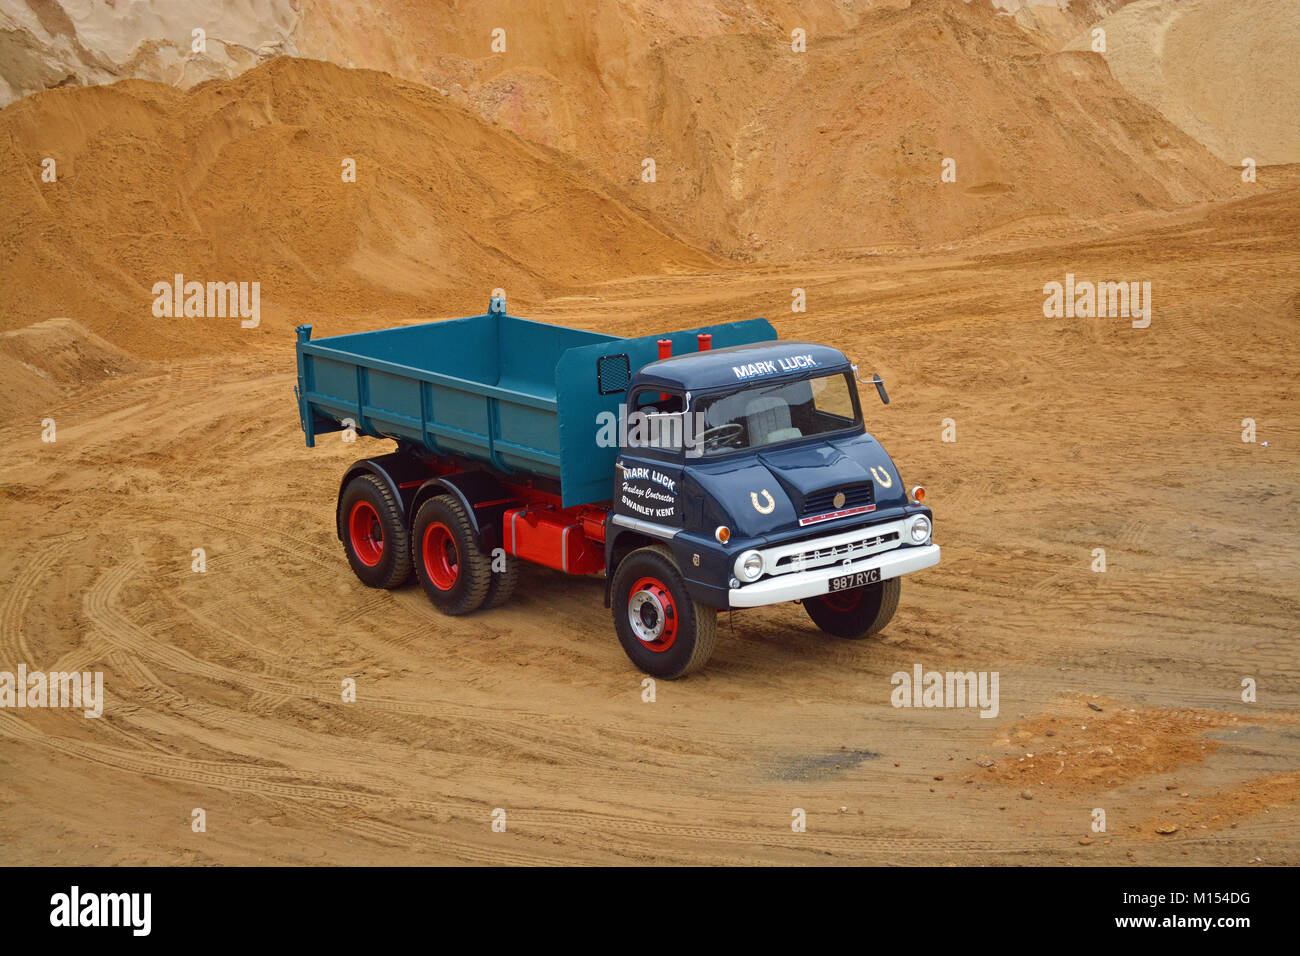 AWD Ford Thames tipper in sand quarry Stock Photo